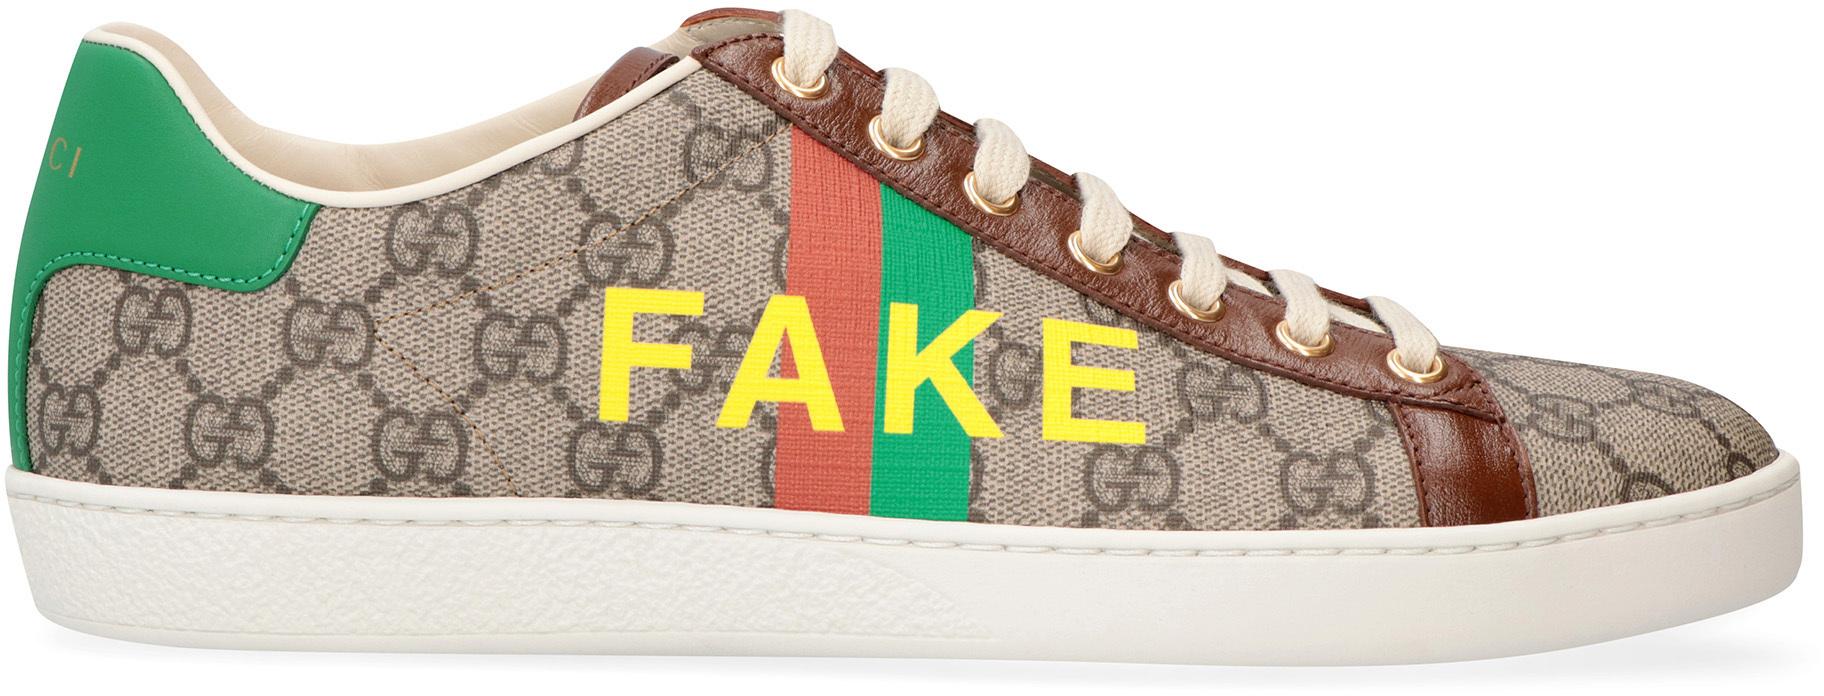 Gucci Ace Fake-not Print Sneakers in Natural | Lyst UK